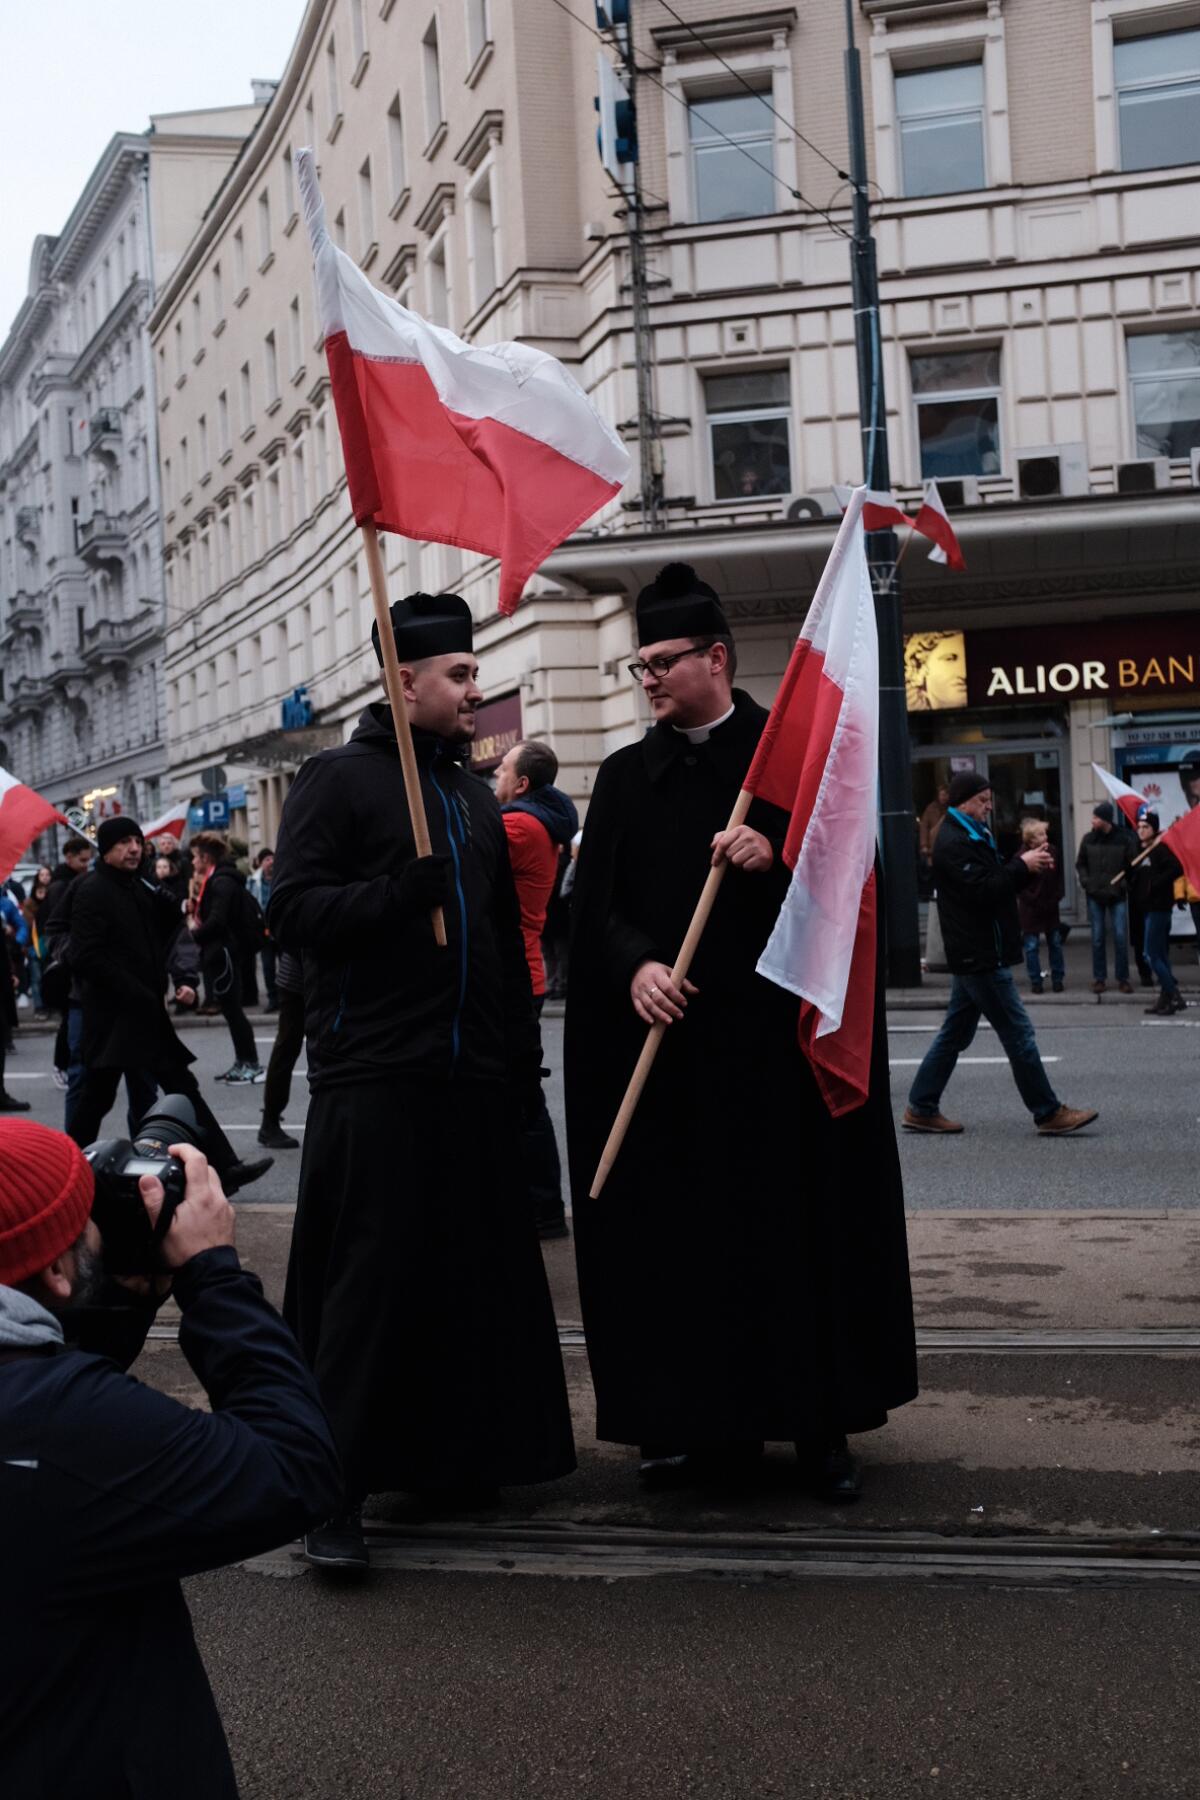 Priests pose with Polish flags in Warsaw during the Independence Day march organized by ultranationalists on Nov. 11, 2019. Although the Church of Poland distances itself from the event, the march is packed with religious insignia and slogans and is attended by religious Poles.